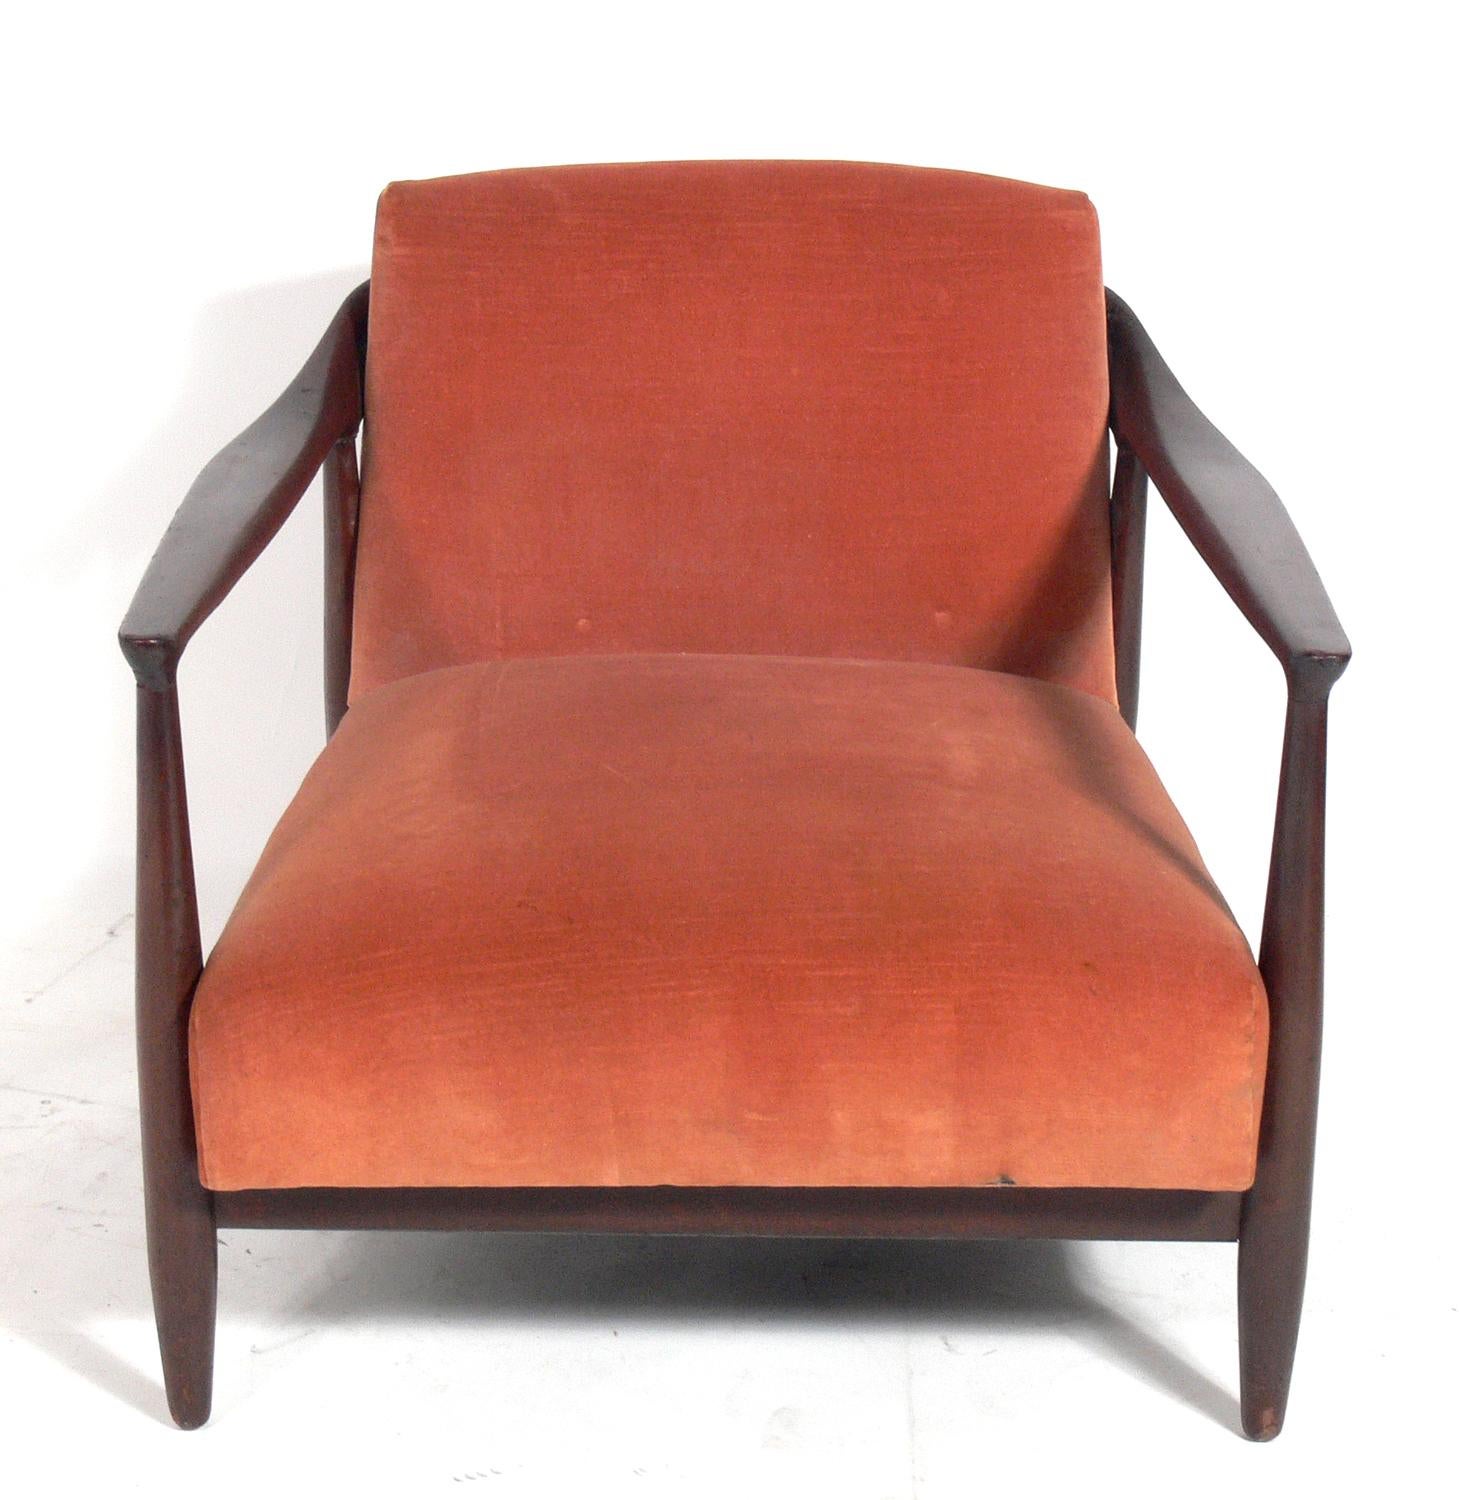 Low slung Danish modern lounge chair by Ib Kofod-Larsen, Denmark, circa 1960s. This chair is currently being refinished and reupholstered. The price noted below includes refinishing and reupholstery in your fabric. Simply send us your fabric after